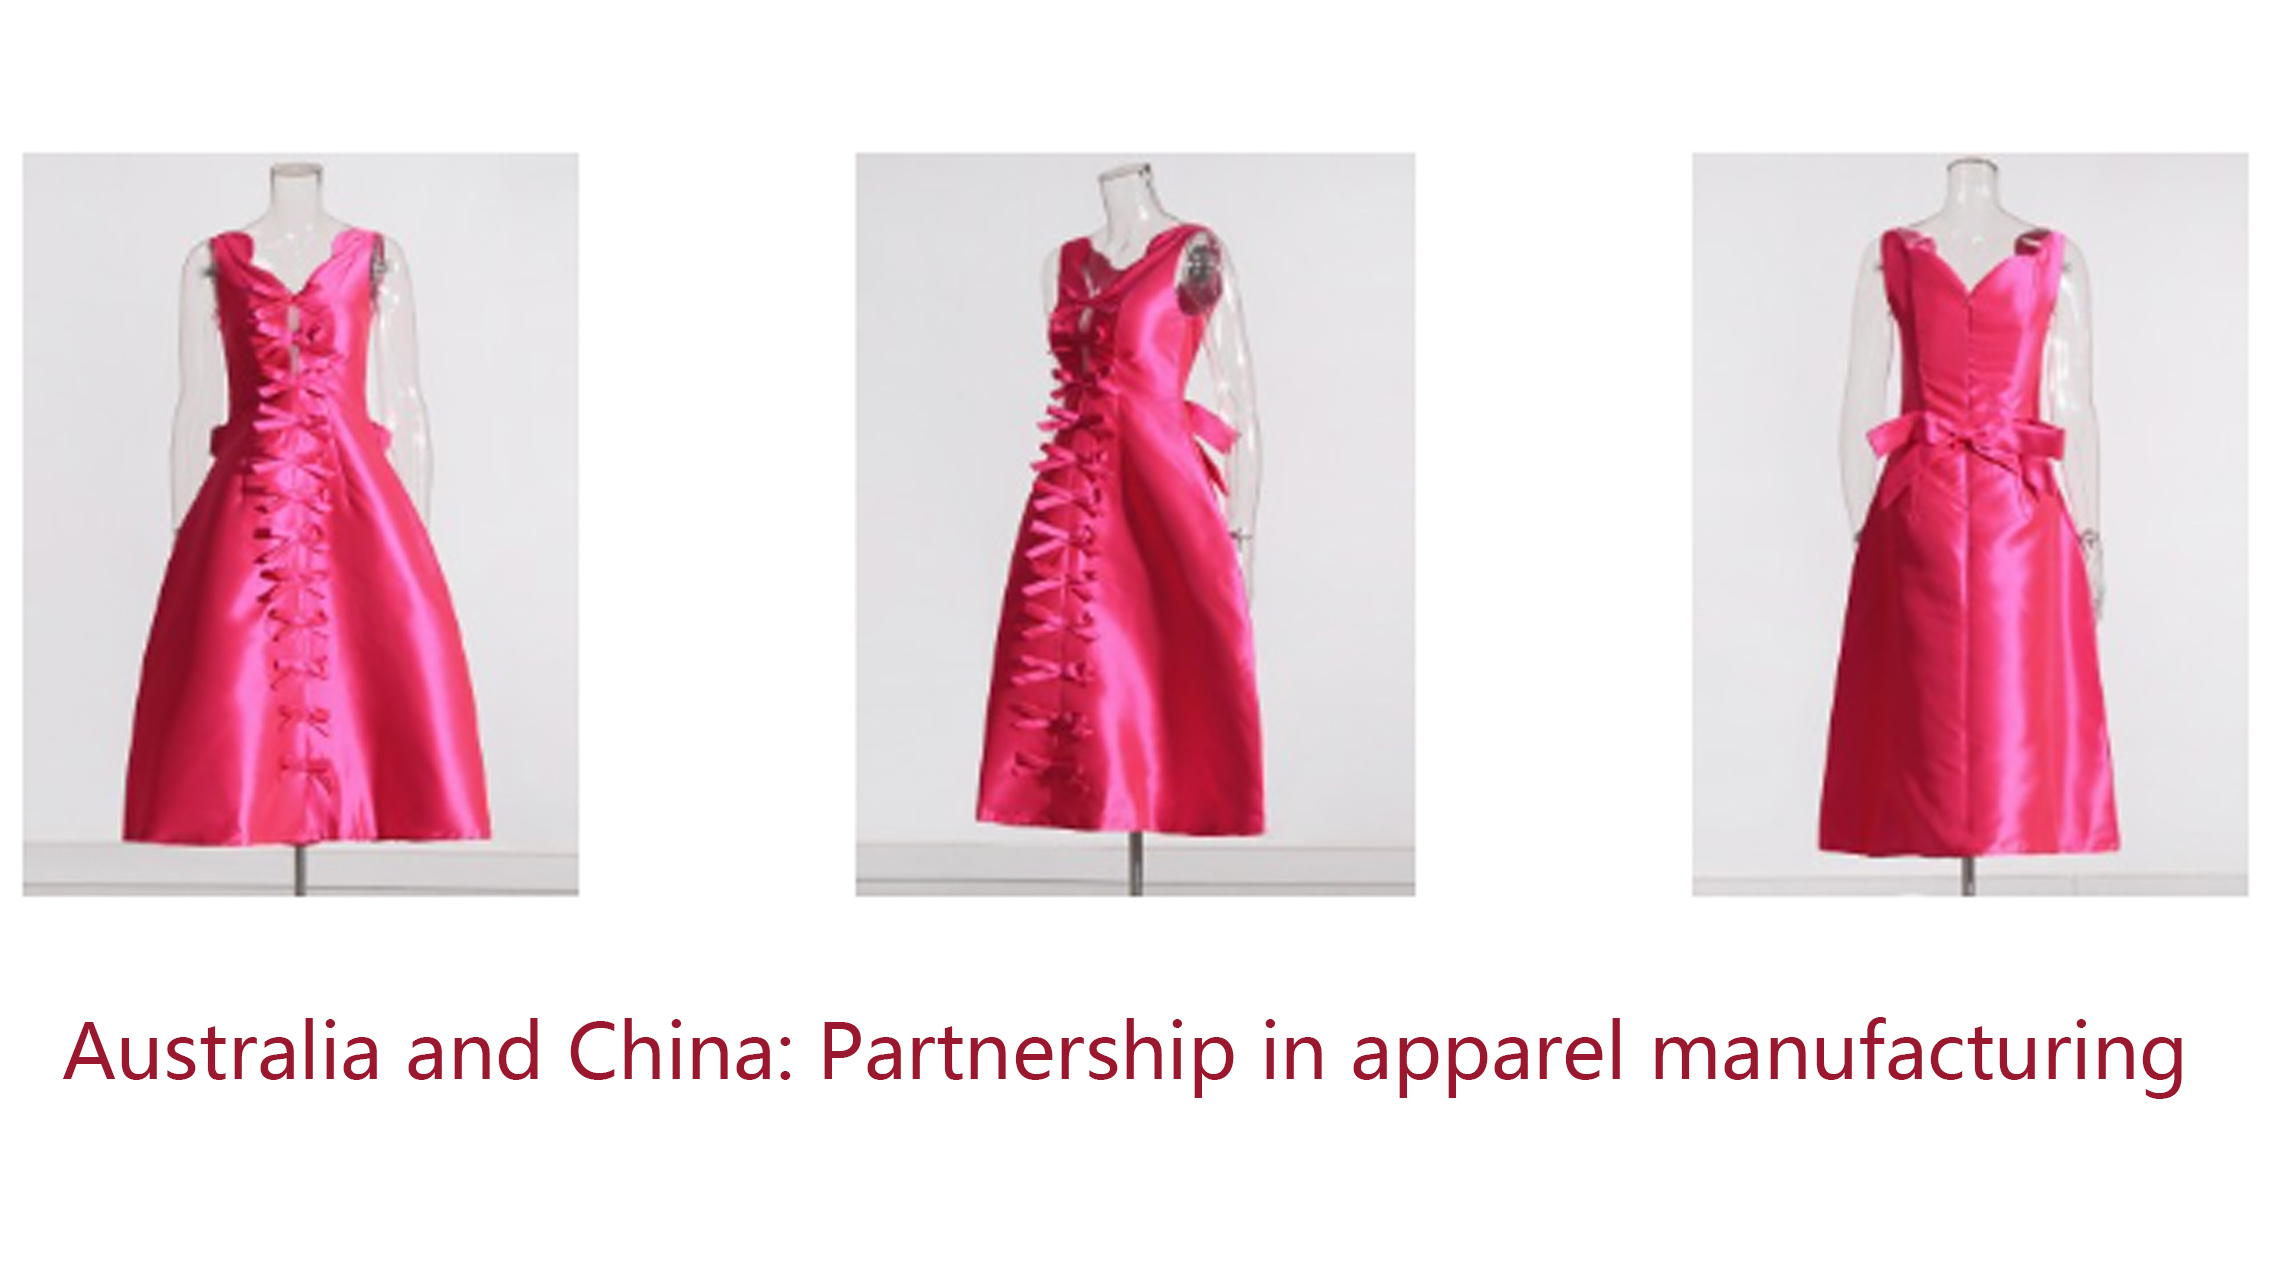 Australia and China: Partnership in apparel manufacturing